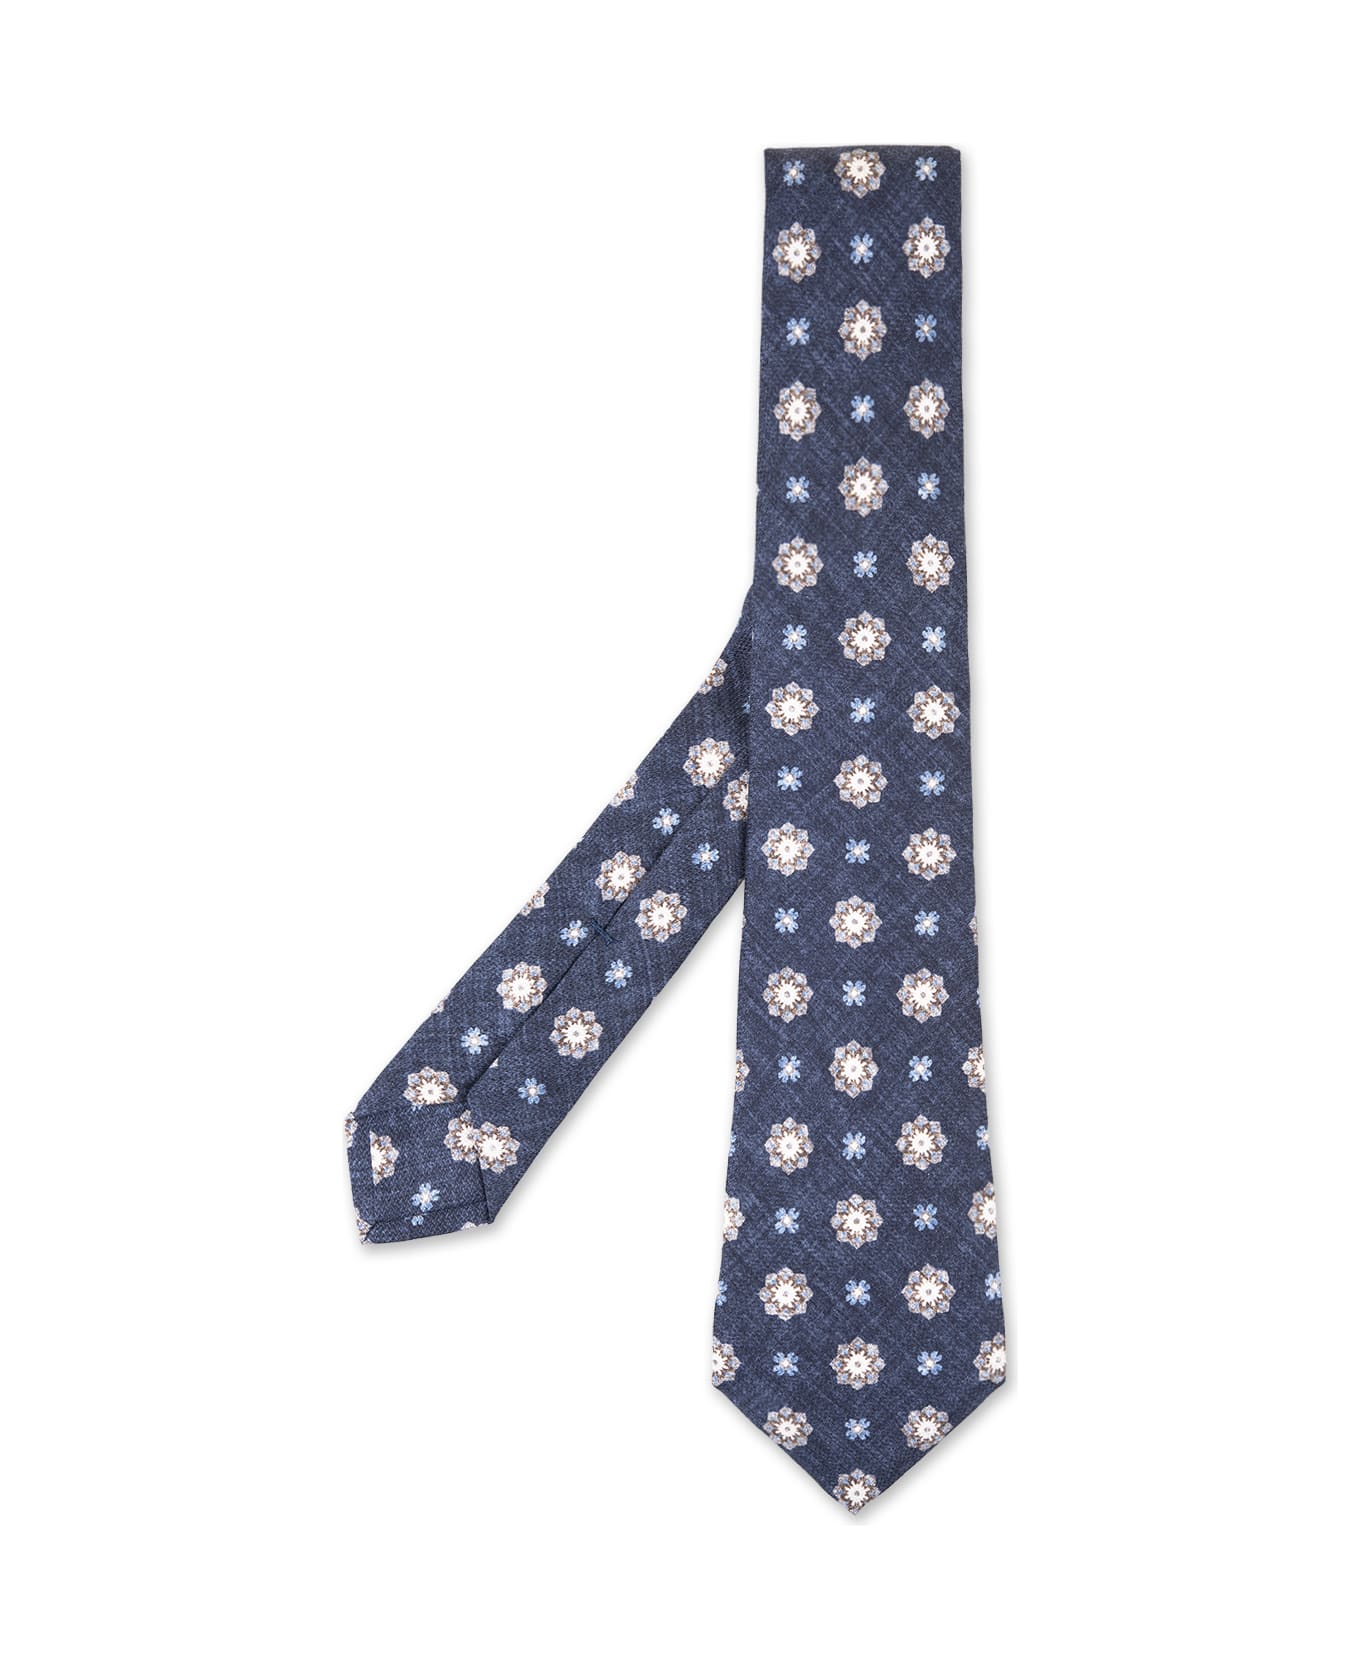 Kiton Navy Blue Tie With Flower Pattern - Blue ネクタイ